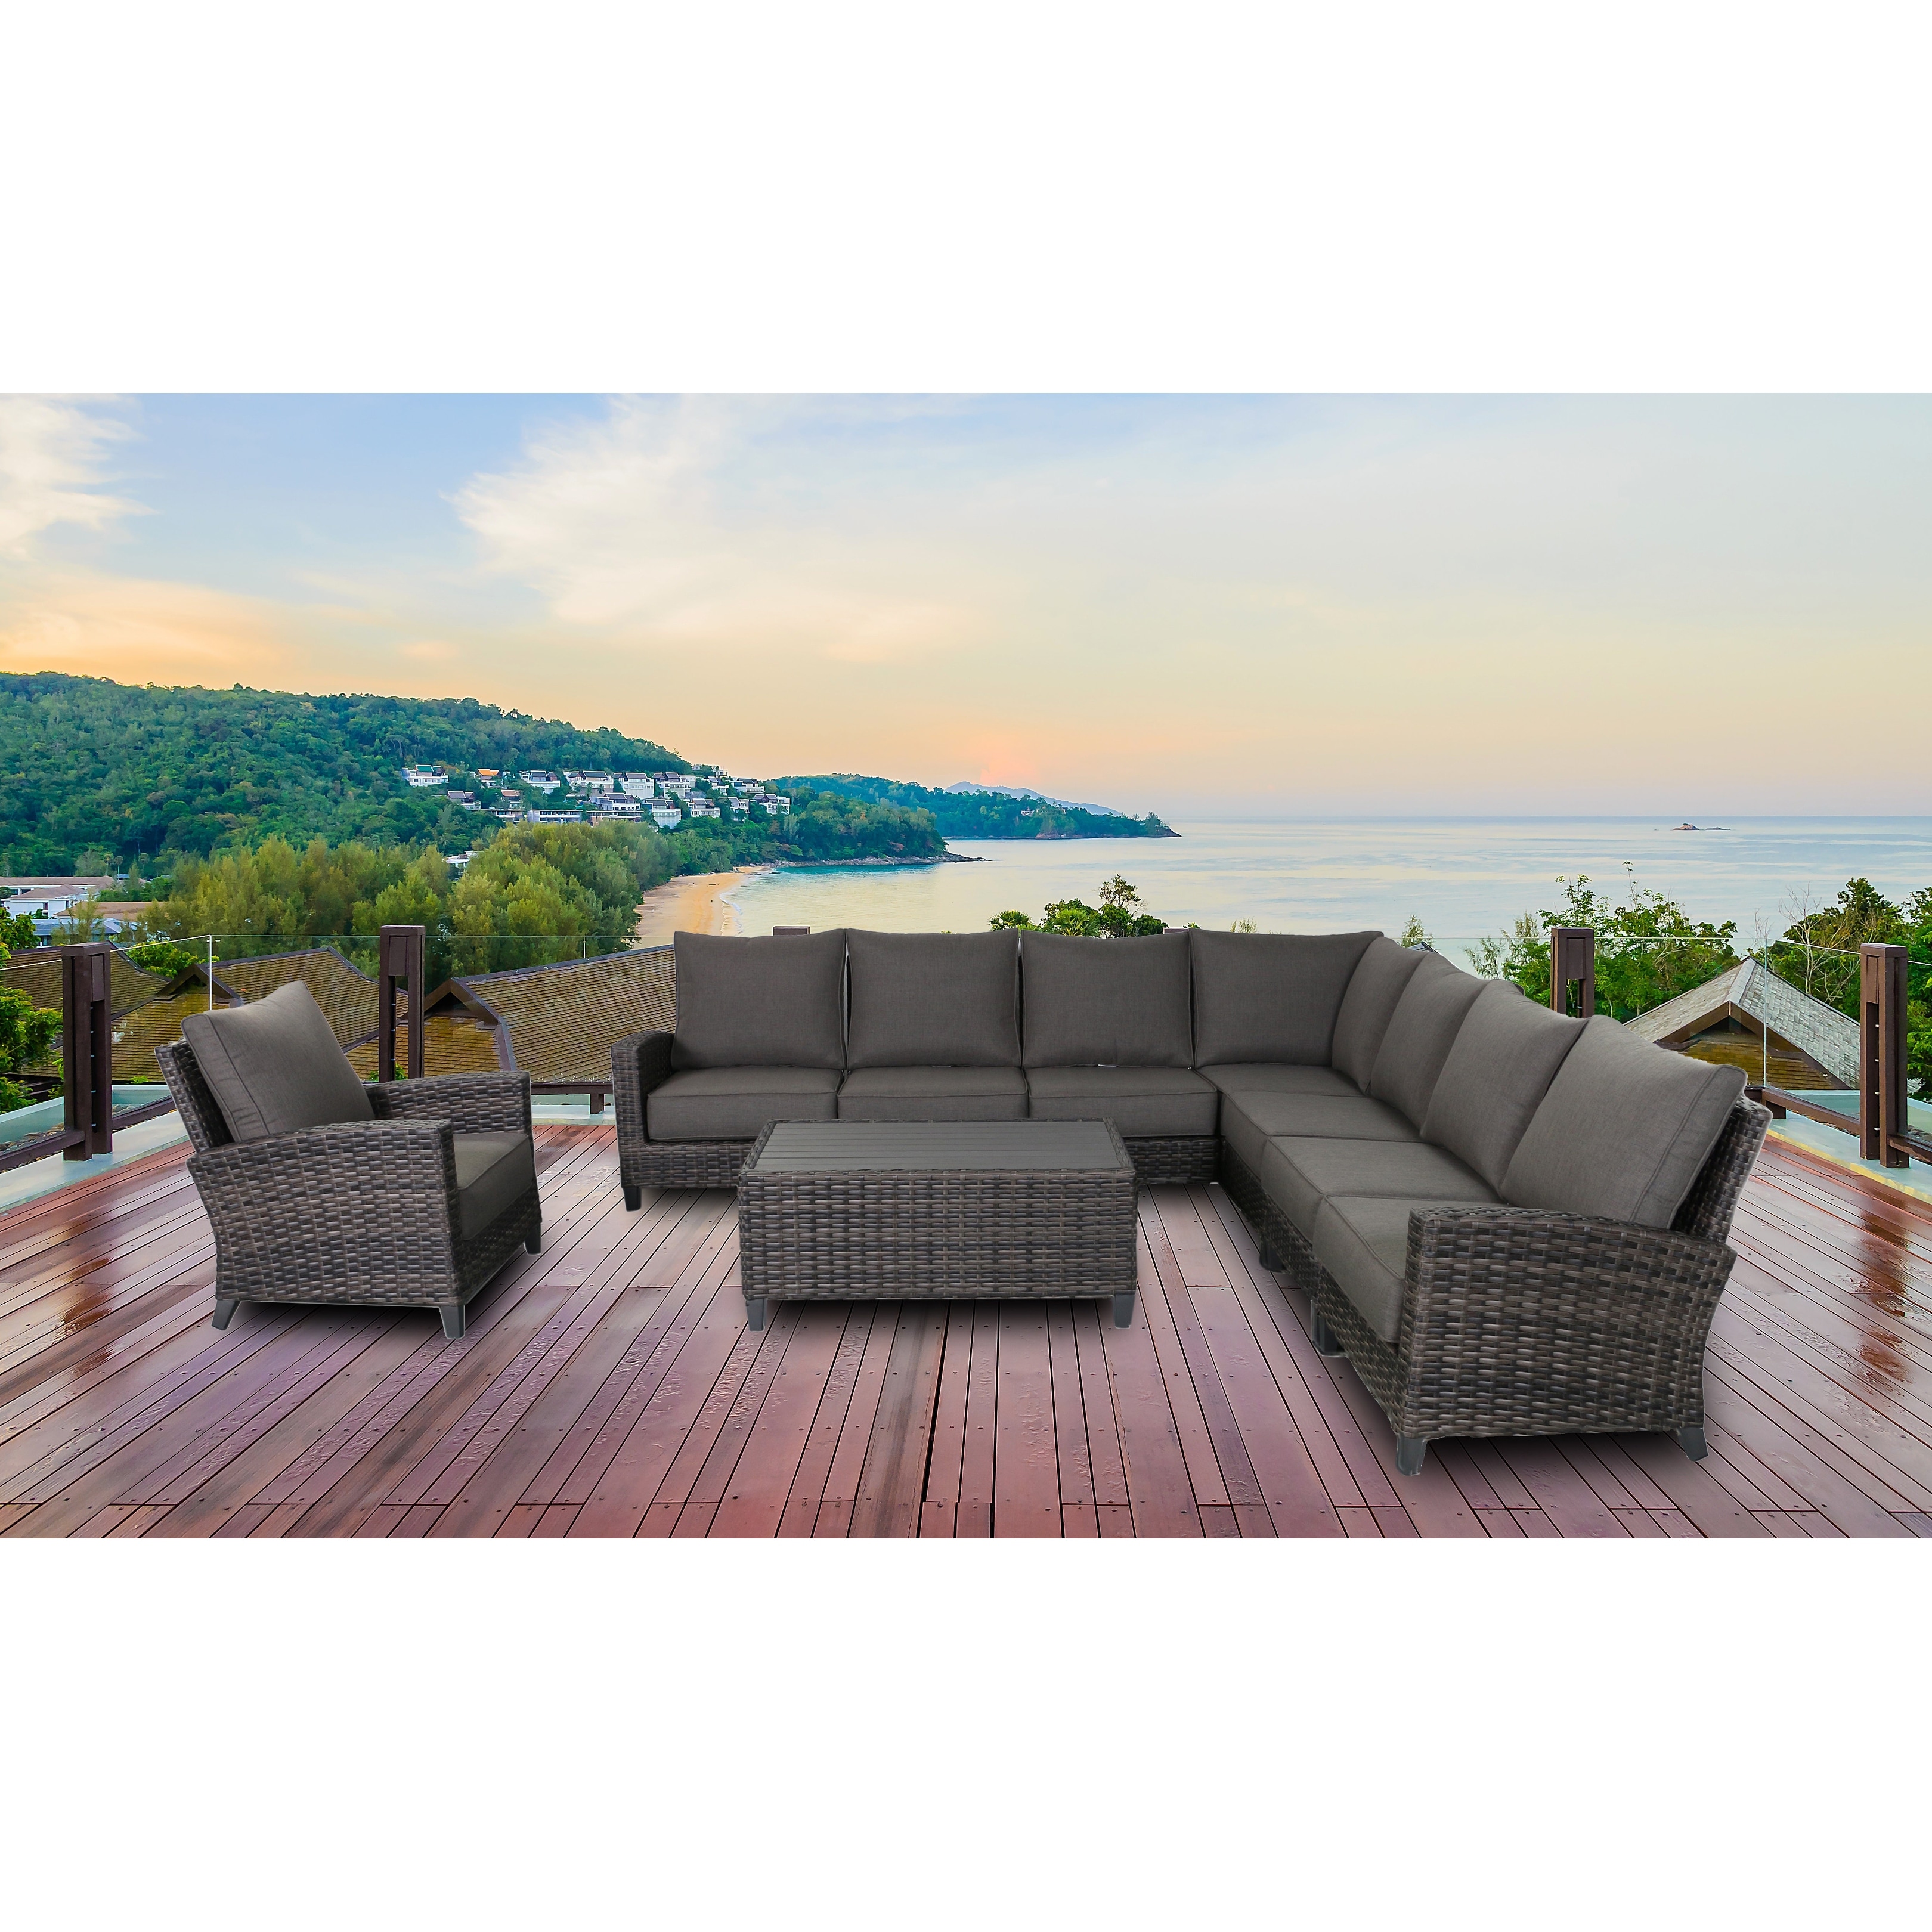 Barbados 7-piece Sectional Set Outdoor Patio Furniture Rattan Wicker Frame Includes Club Chair